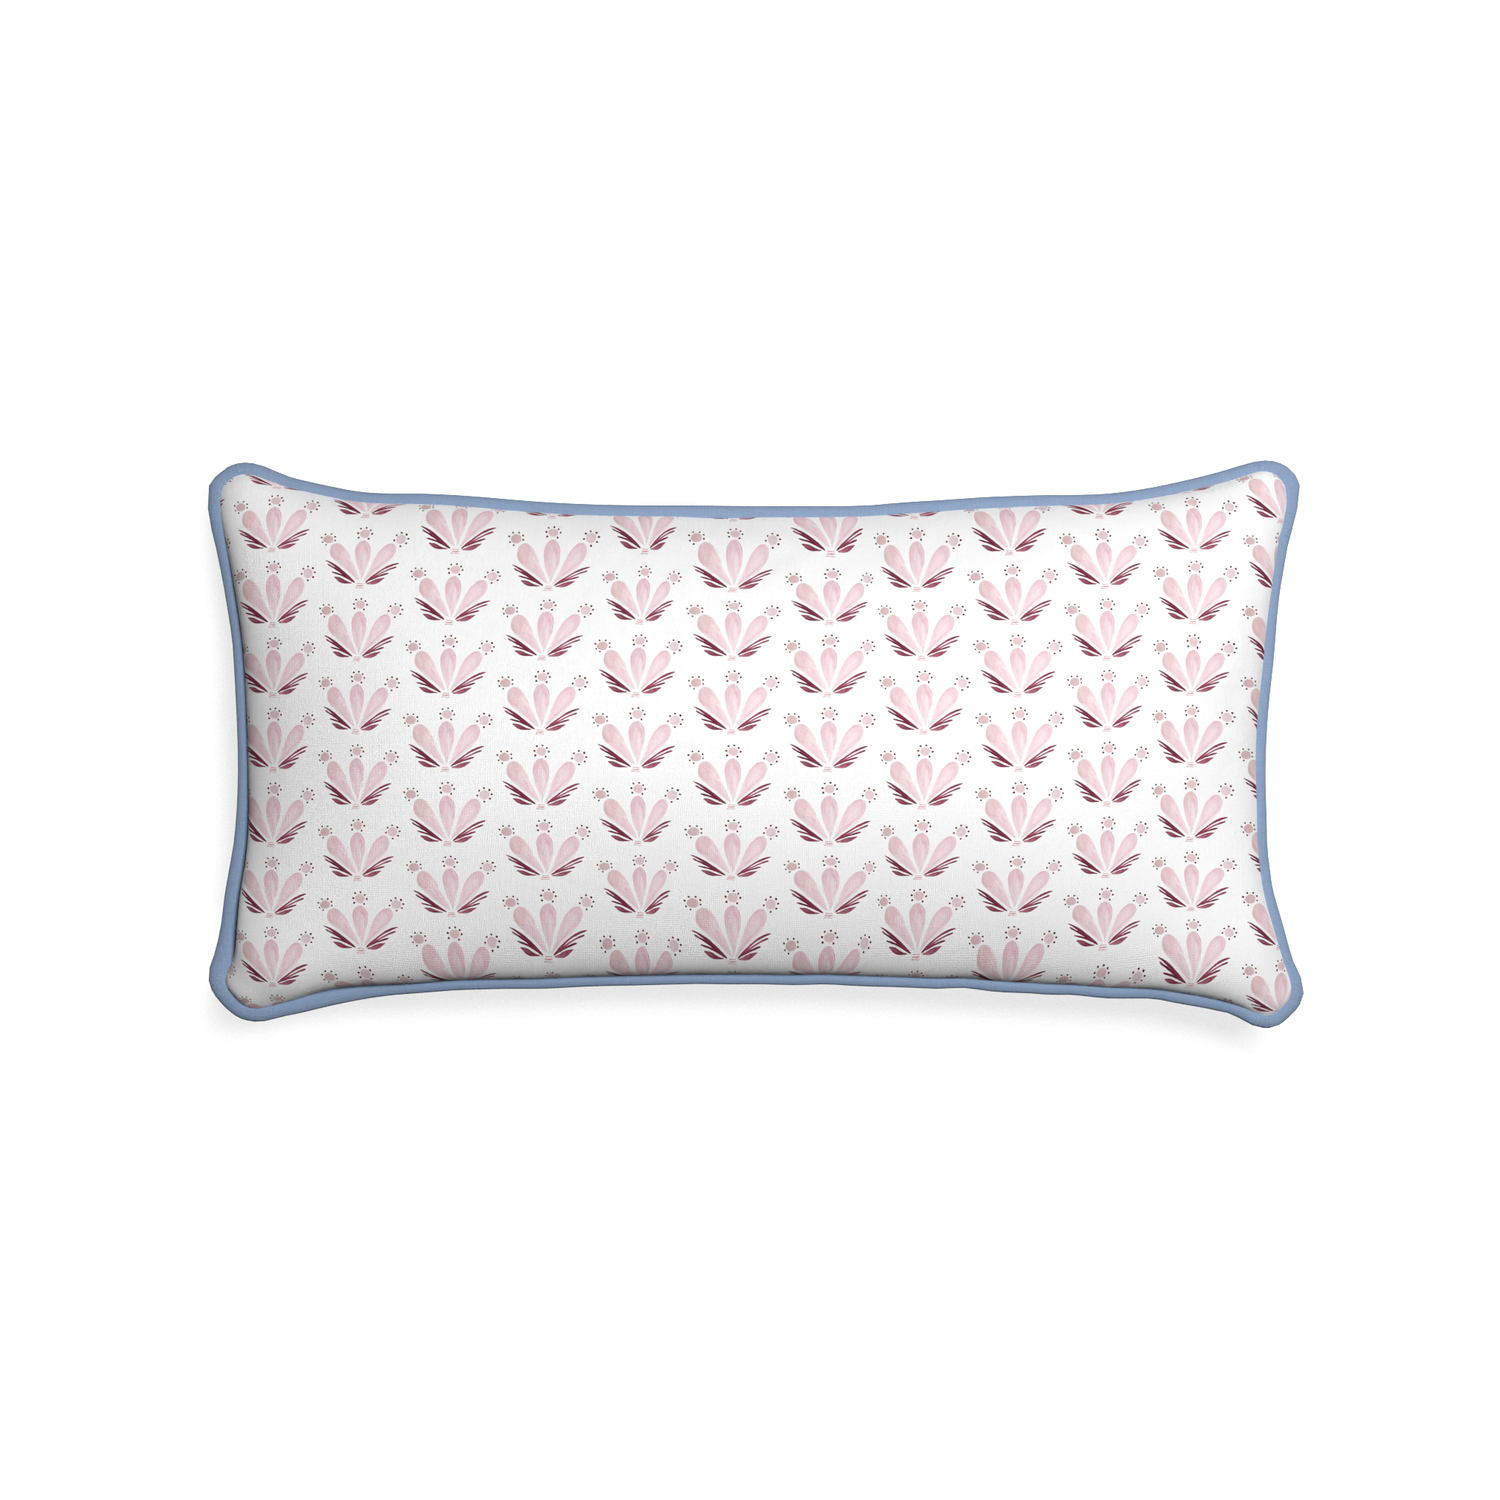 Midi-lumbar serena pink custom pink & burgundy drop repeat floralpillow with sky piping on white background